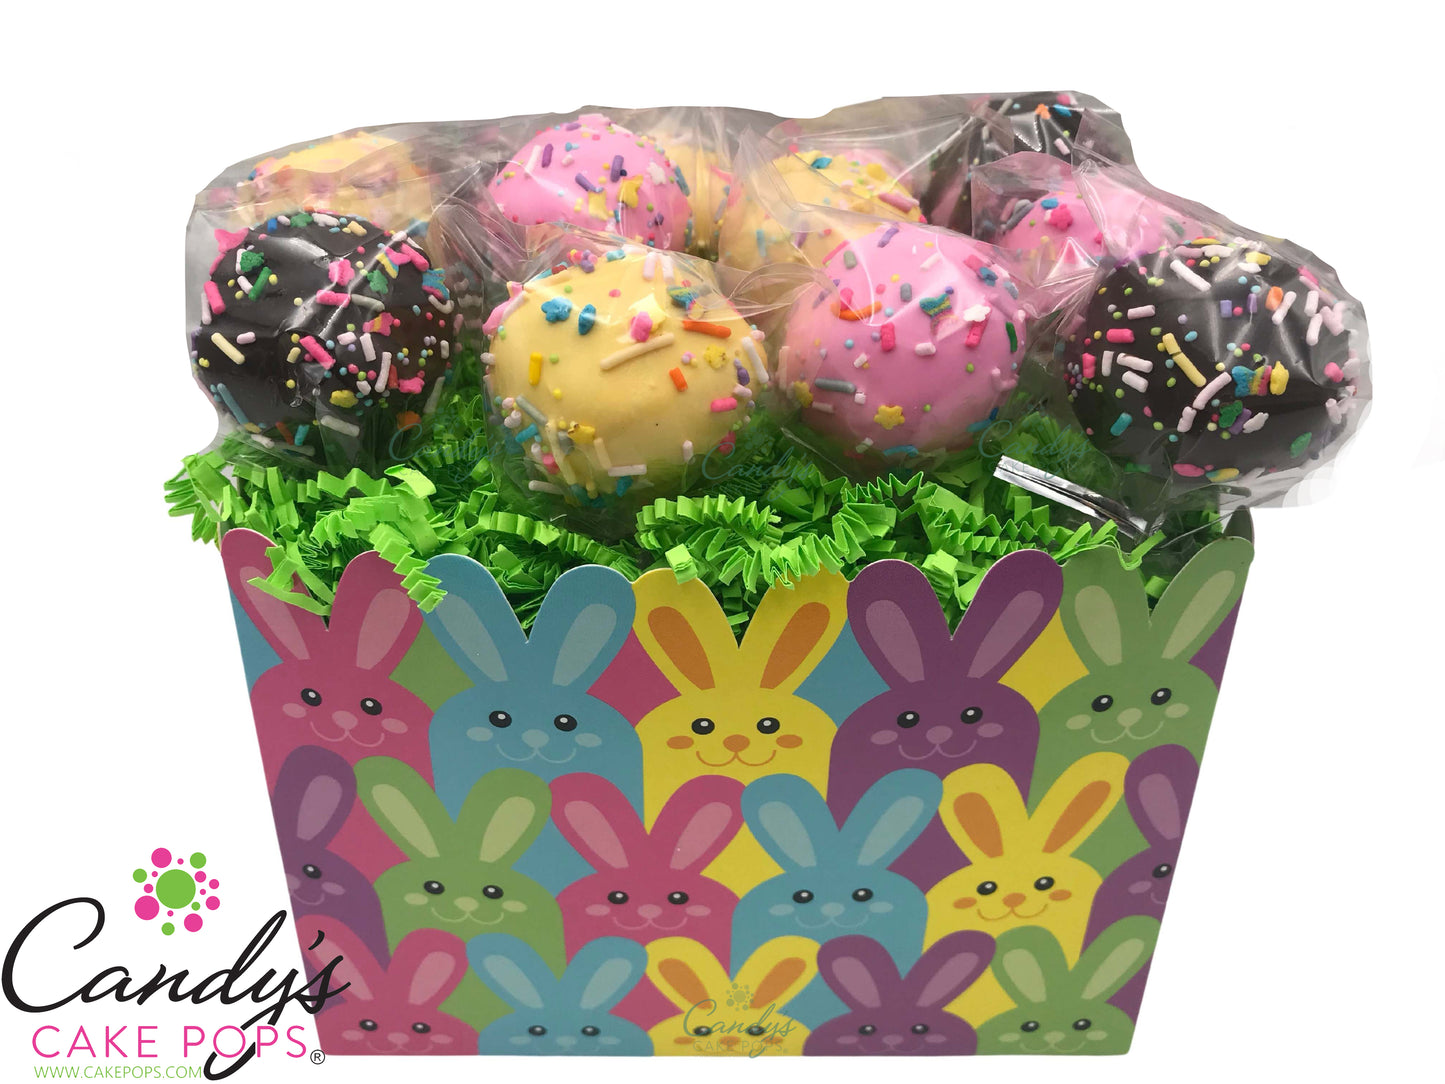 Bunny Peeps Easter Cake Pop Gift Box - Candy's Cake Pops